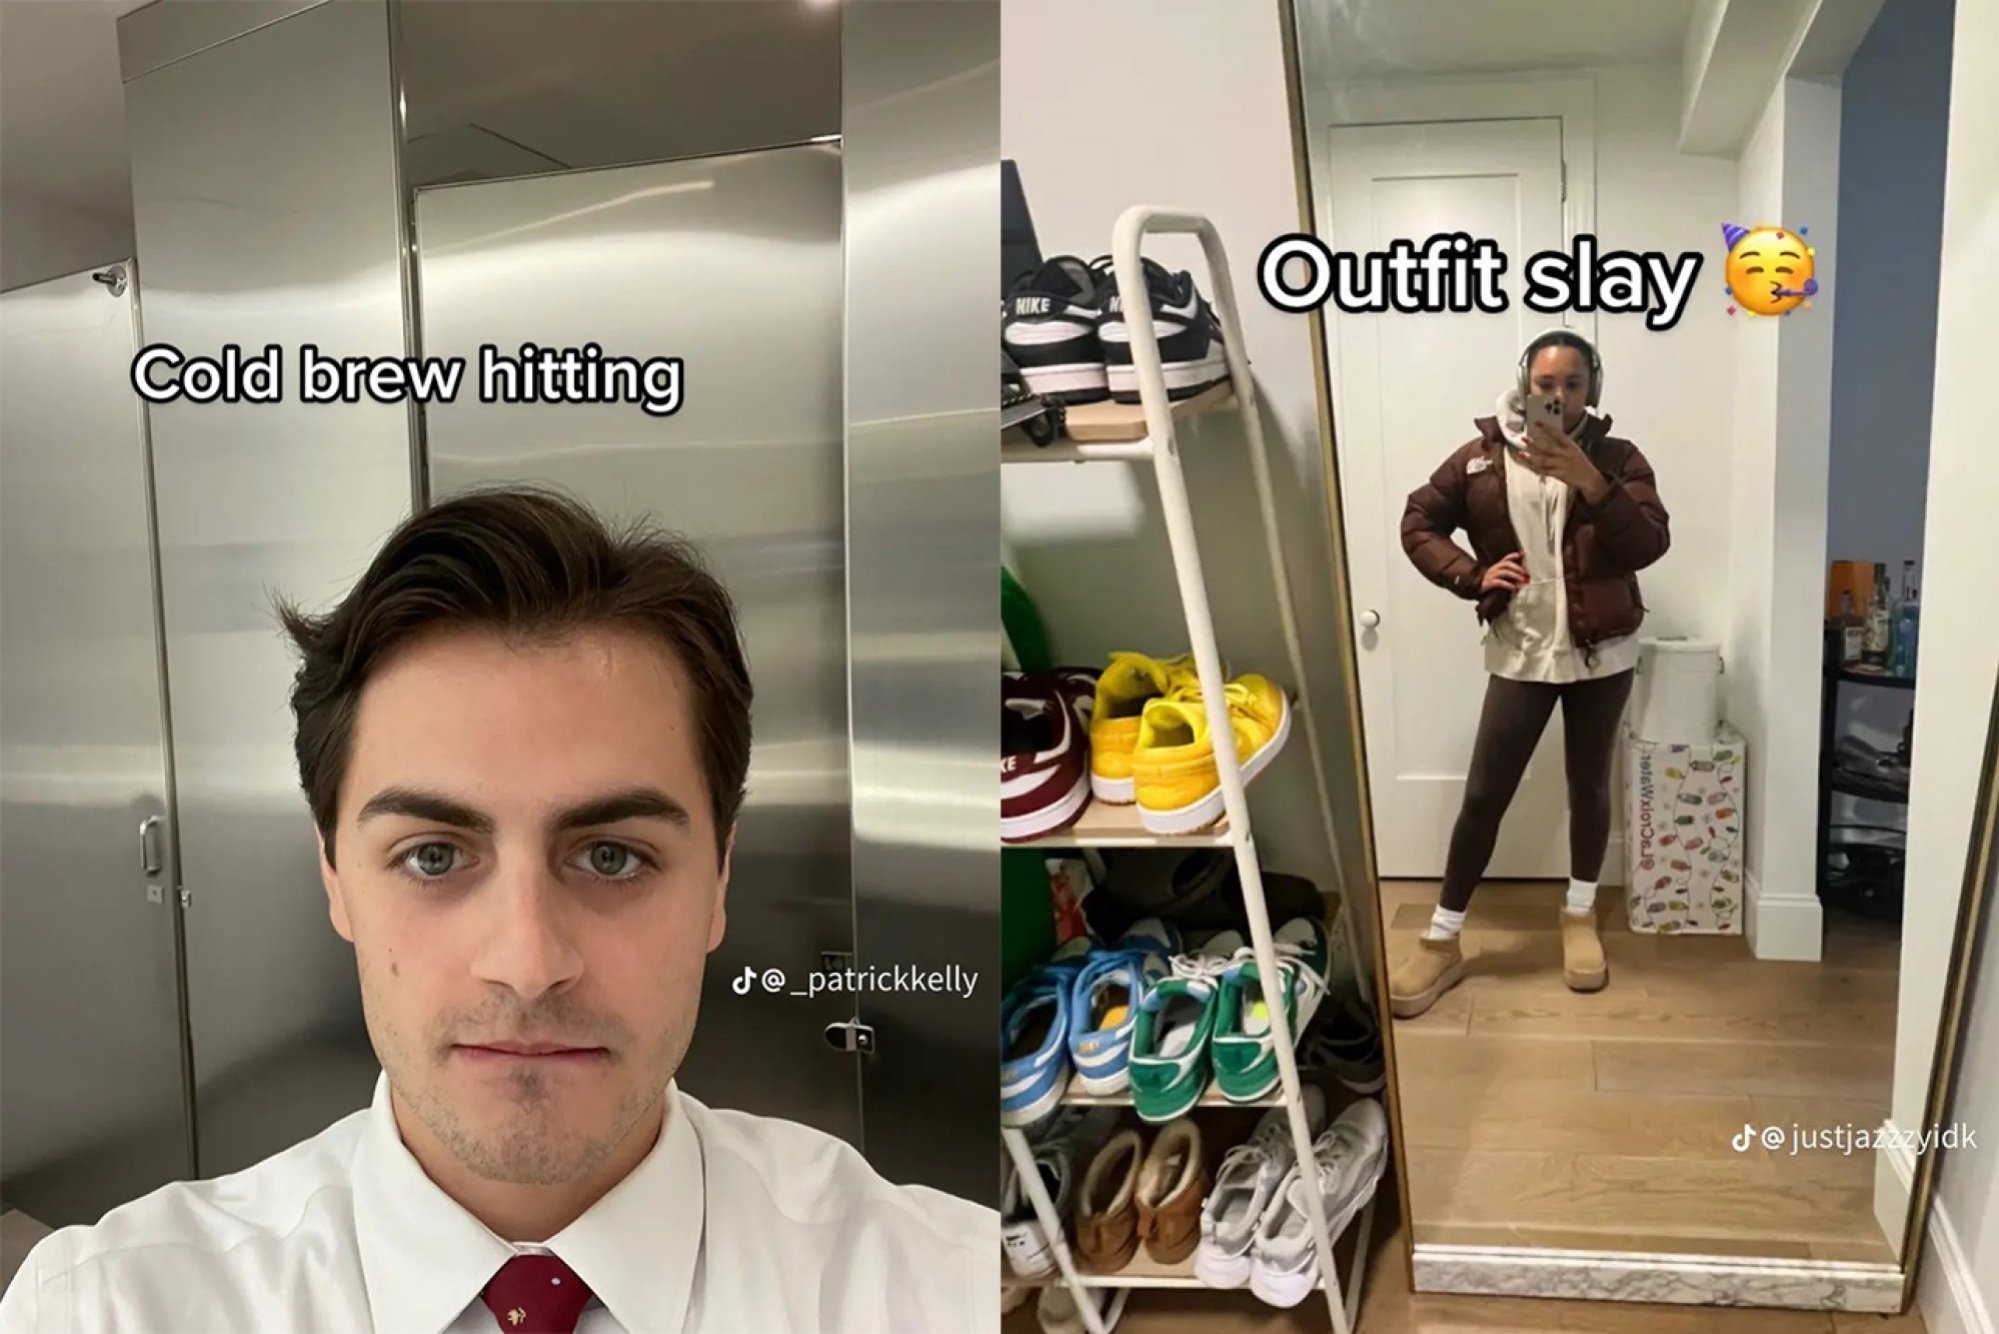 Two examples of the trend one says, "cold brew hitting" and shows a guy in the bathroom in a dress shirt and tie and the other says "outfit slay" and is a mirror selfie of a girl. 